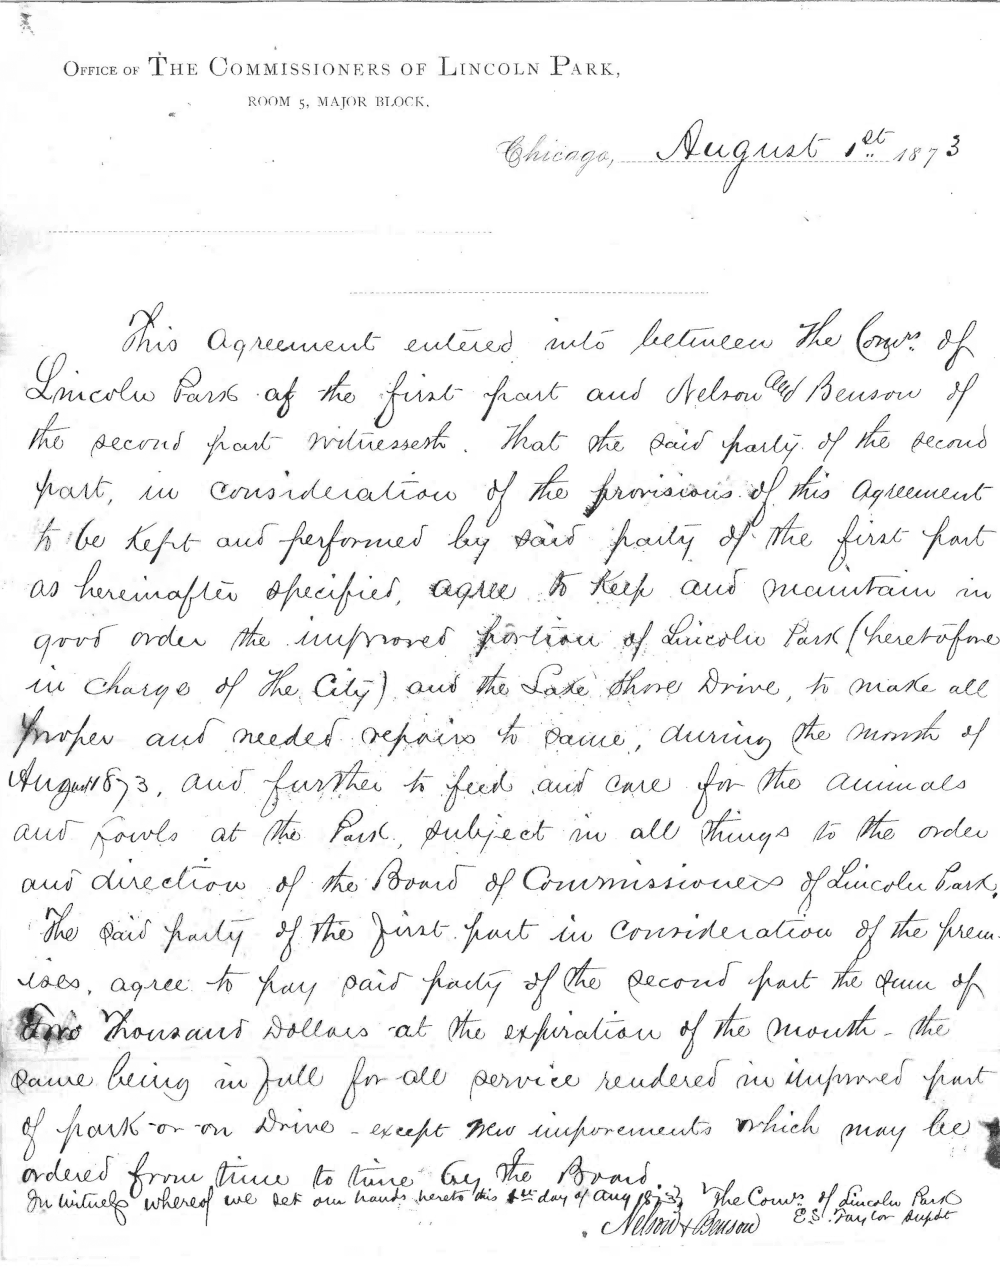 Contract between Nelson &amp; Benson and Lincoln Park Commissioners, August 1, 1873.